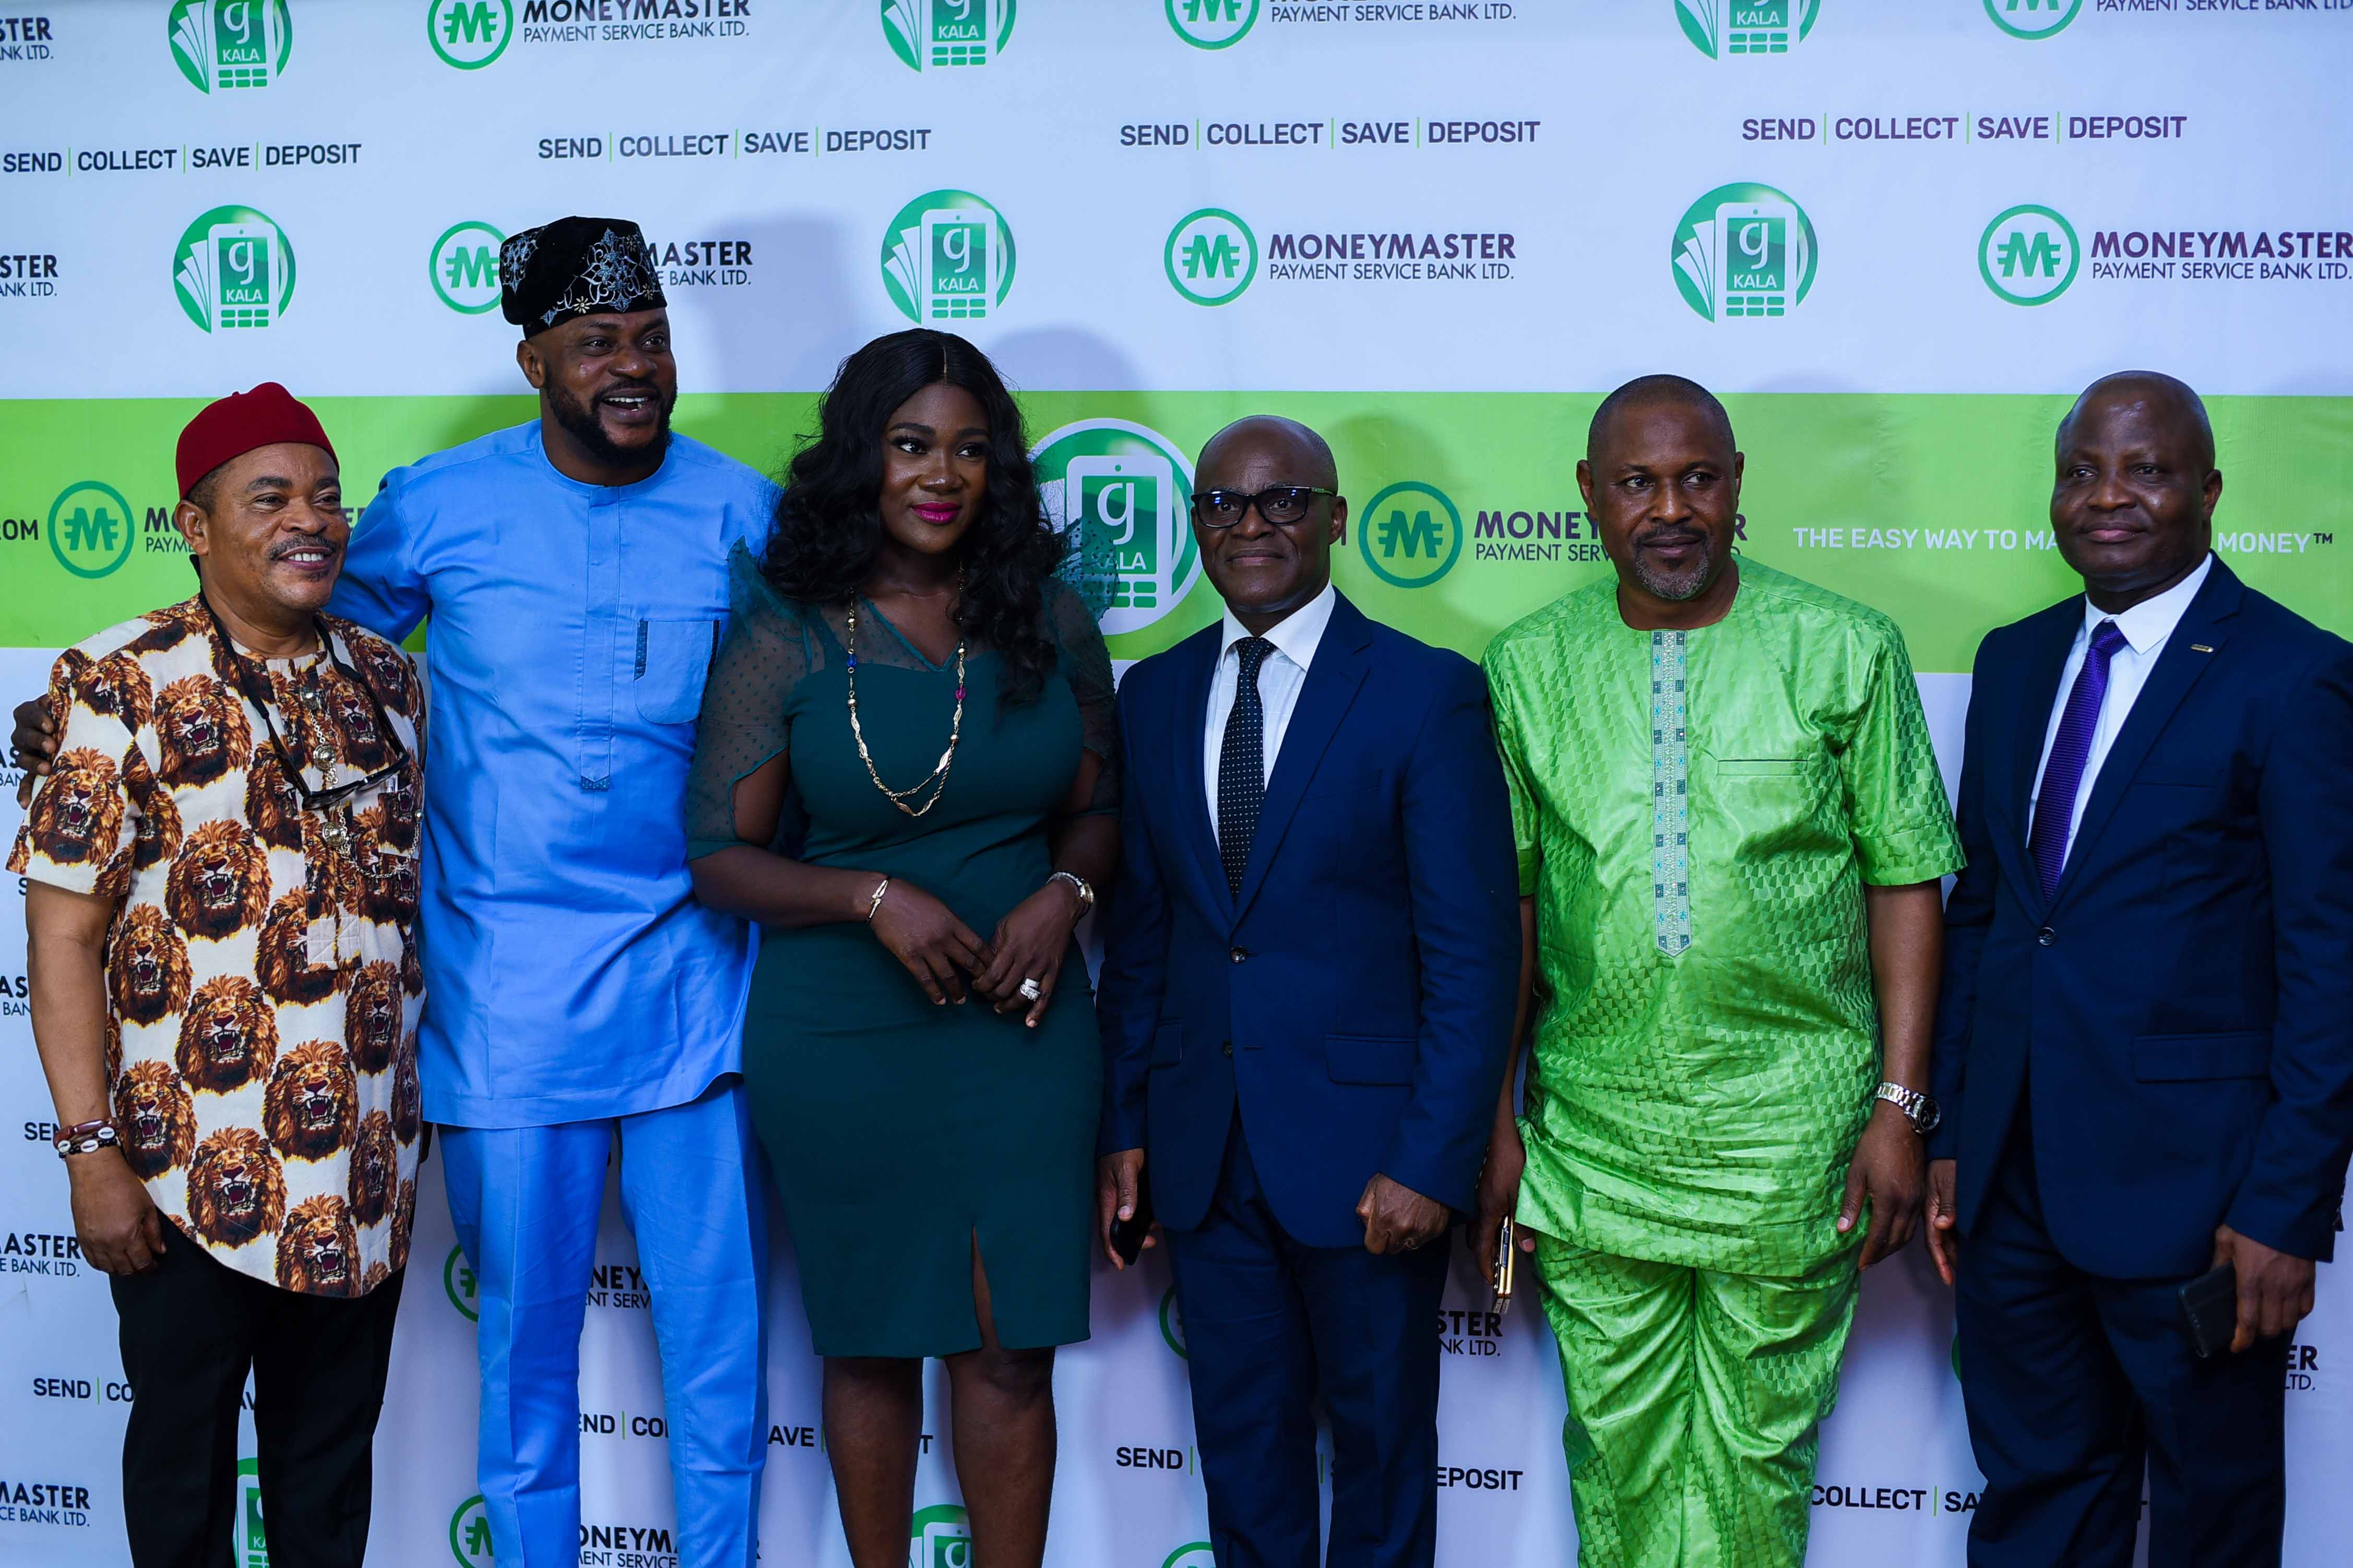 "G-kala" here to promote financial inclusion, MoneyMaster PSB pledges